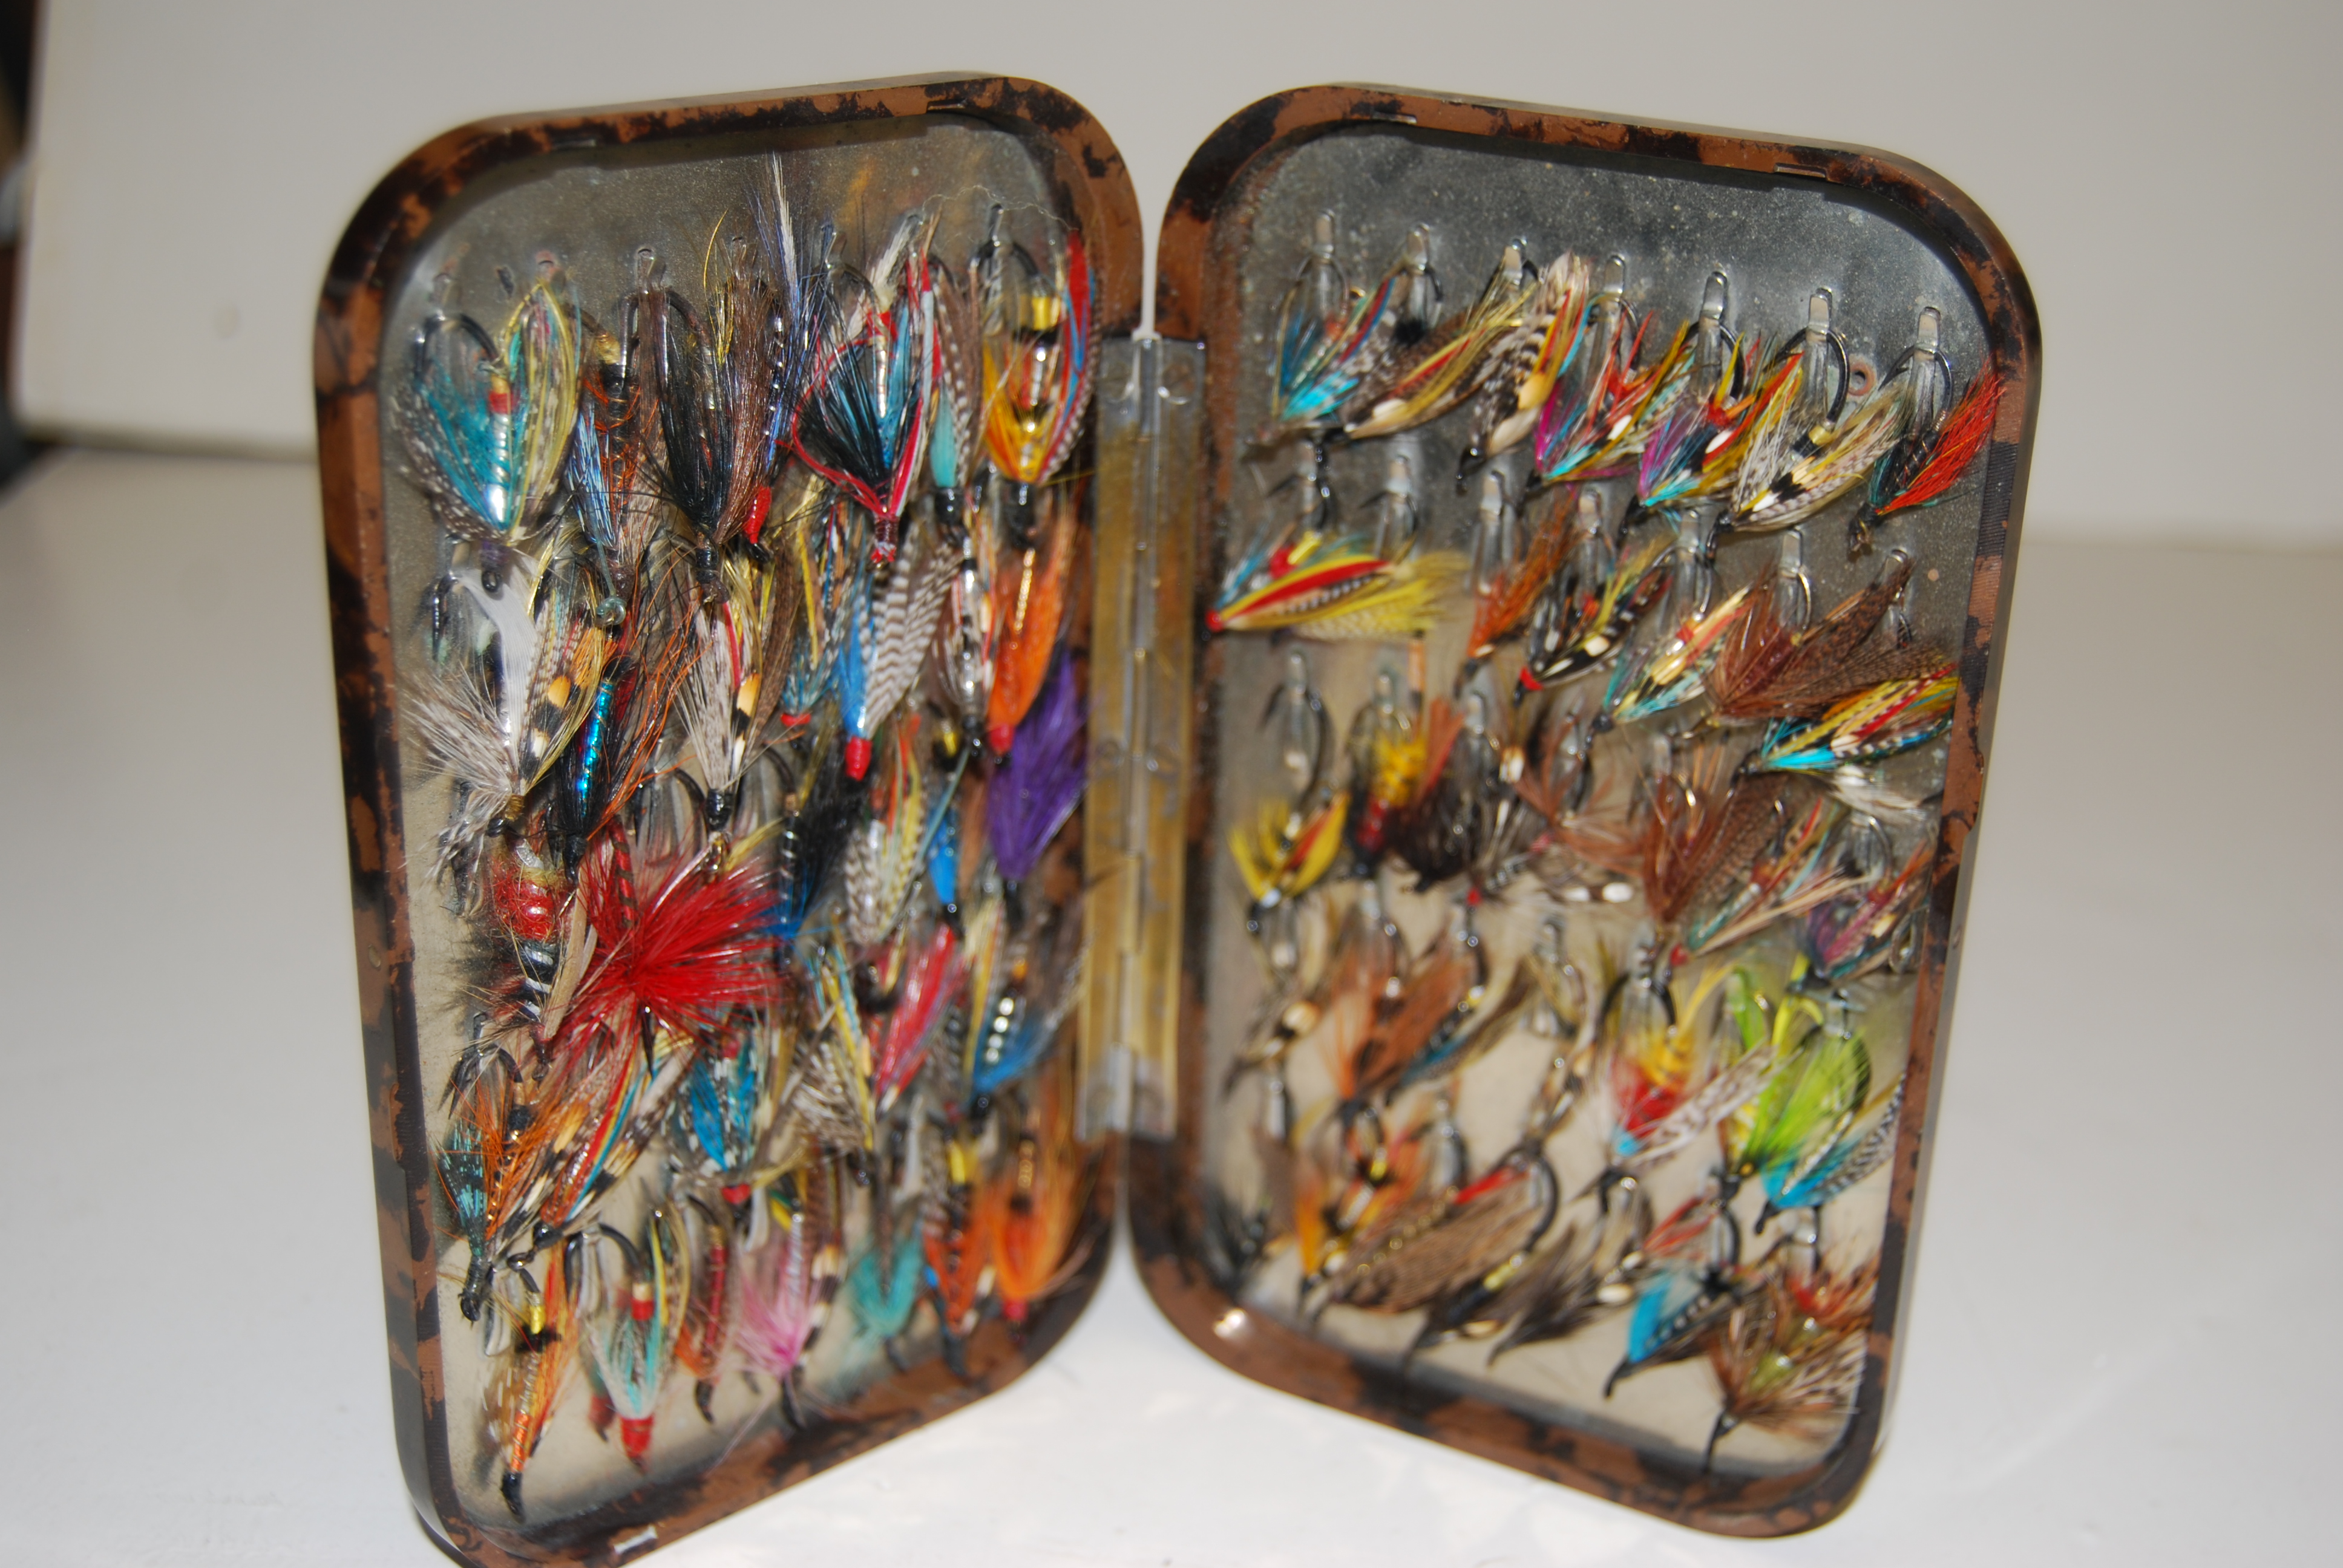 6 1/4 in. HARDY NERODA FLY BOX No. 1B. [ Circa 1934] Small Salmon or Low  Water Salmon Flies. Fitted with 70 Holdtite finger clips. With 70 vintage  Salmon Flies, #4 -#8